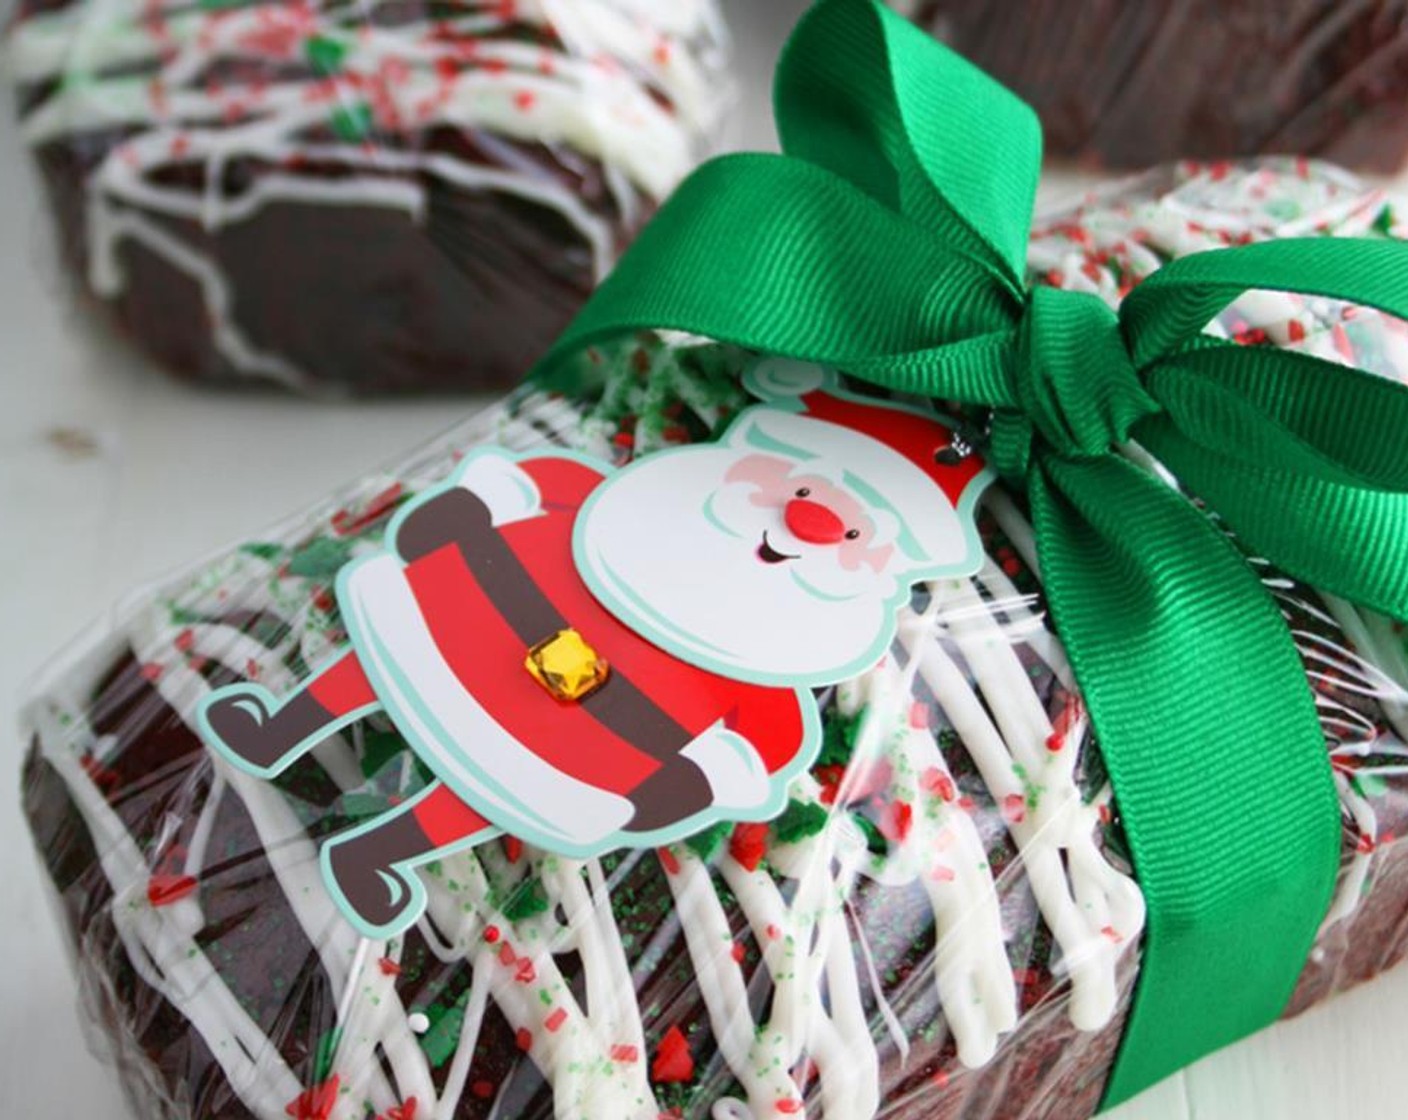 step 11 For a gift, wrap in clear plastic wrap. Tie a bow around it and add gift tag. Store at room temperature for 24 hours or in the refrigerator for up to 5 days.